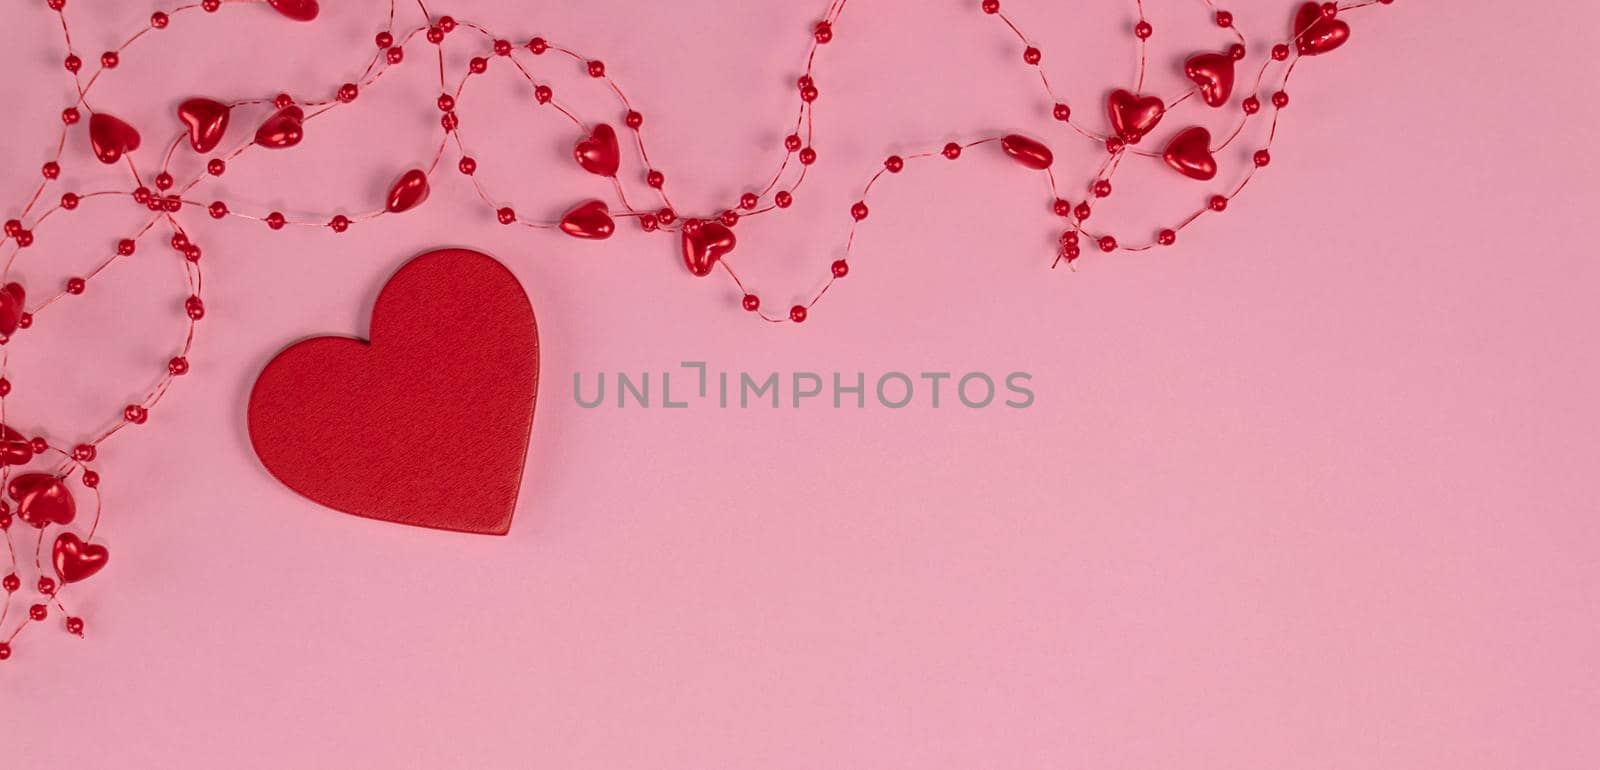 banner with concept of minimalism valentine's day. red heart on pastel pink background with red beads with hearts. Soft focus. flat lay. Copy space